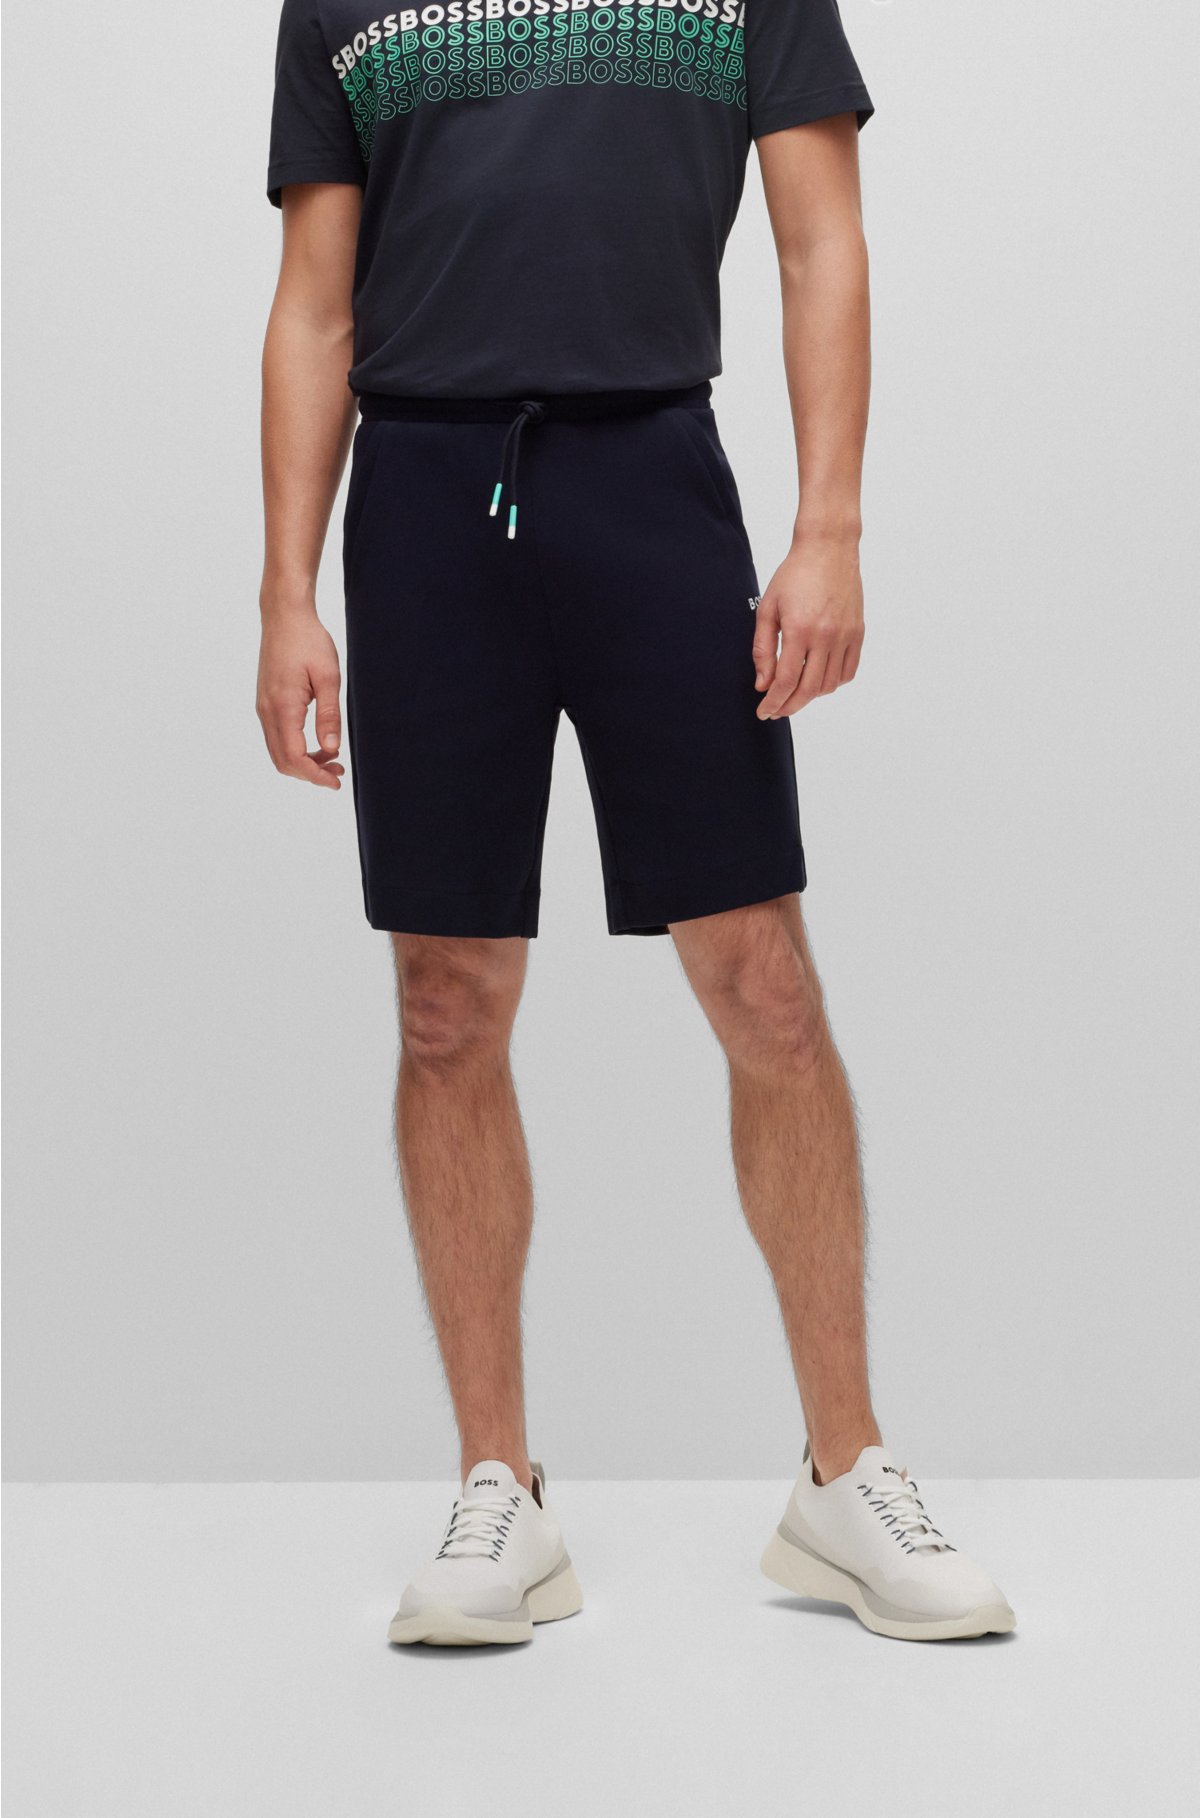 BOSS - Regular-fit shorts logos with multi-coloured